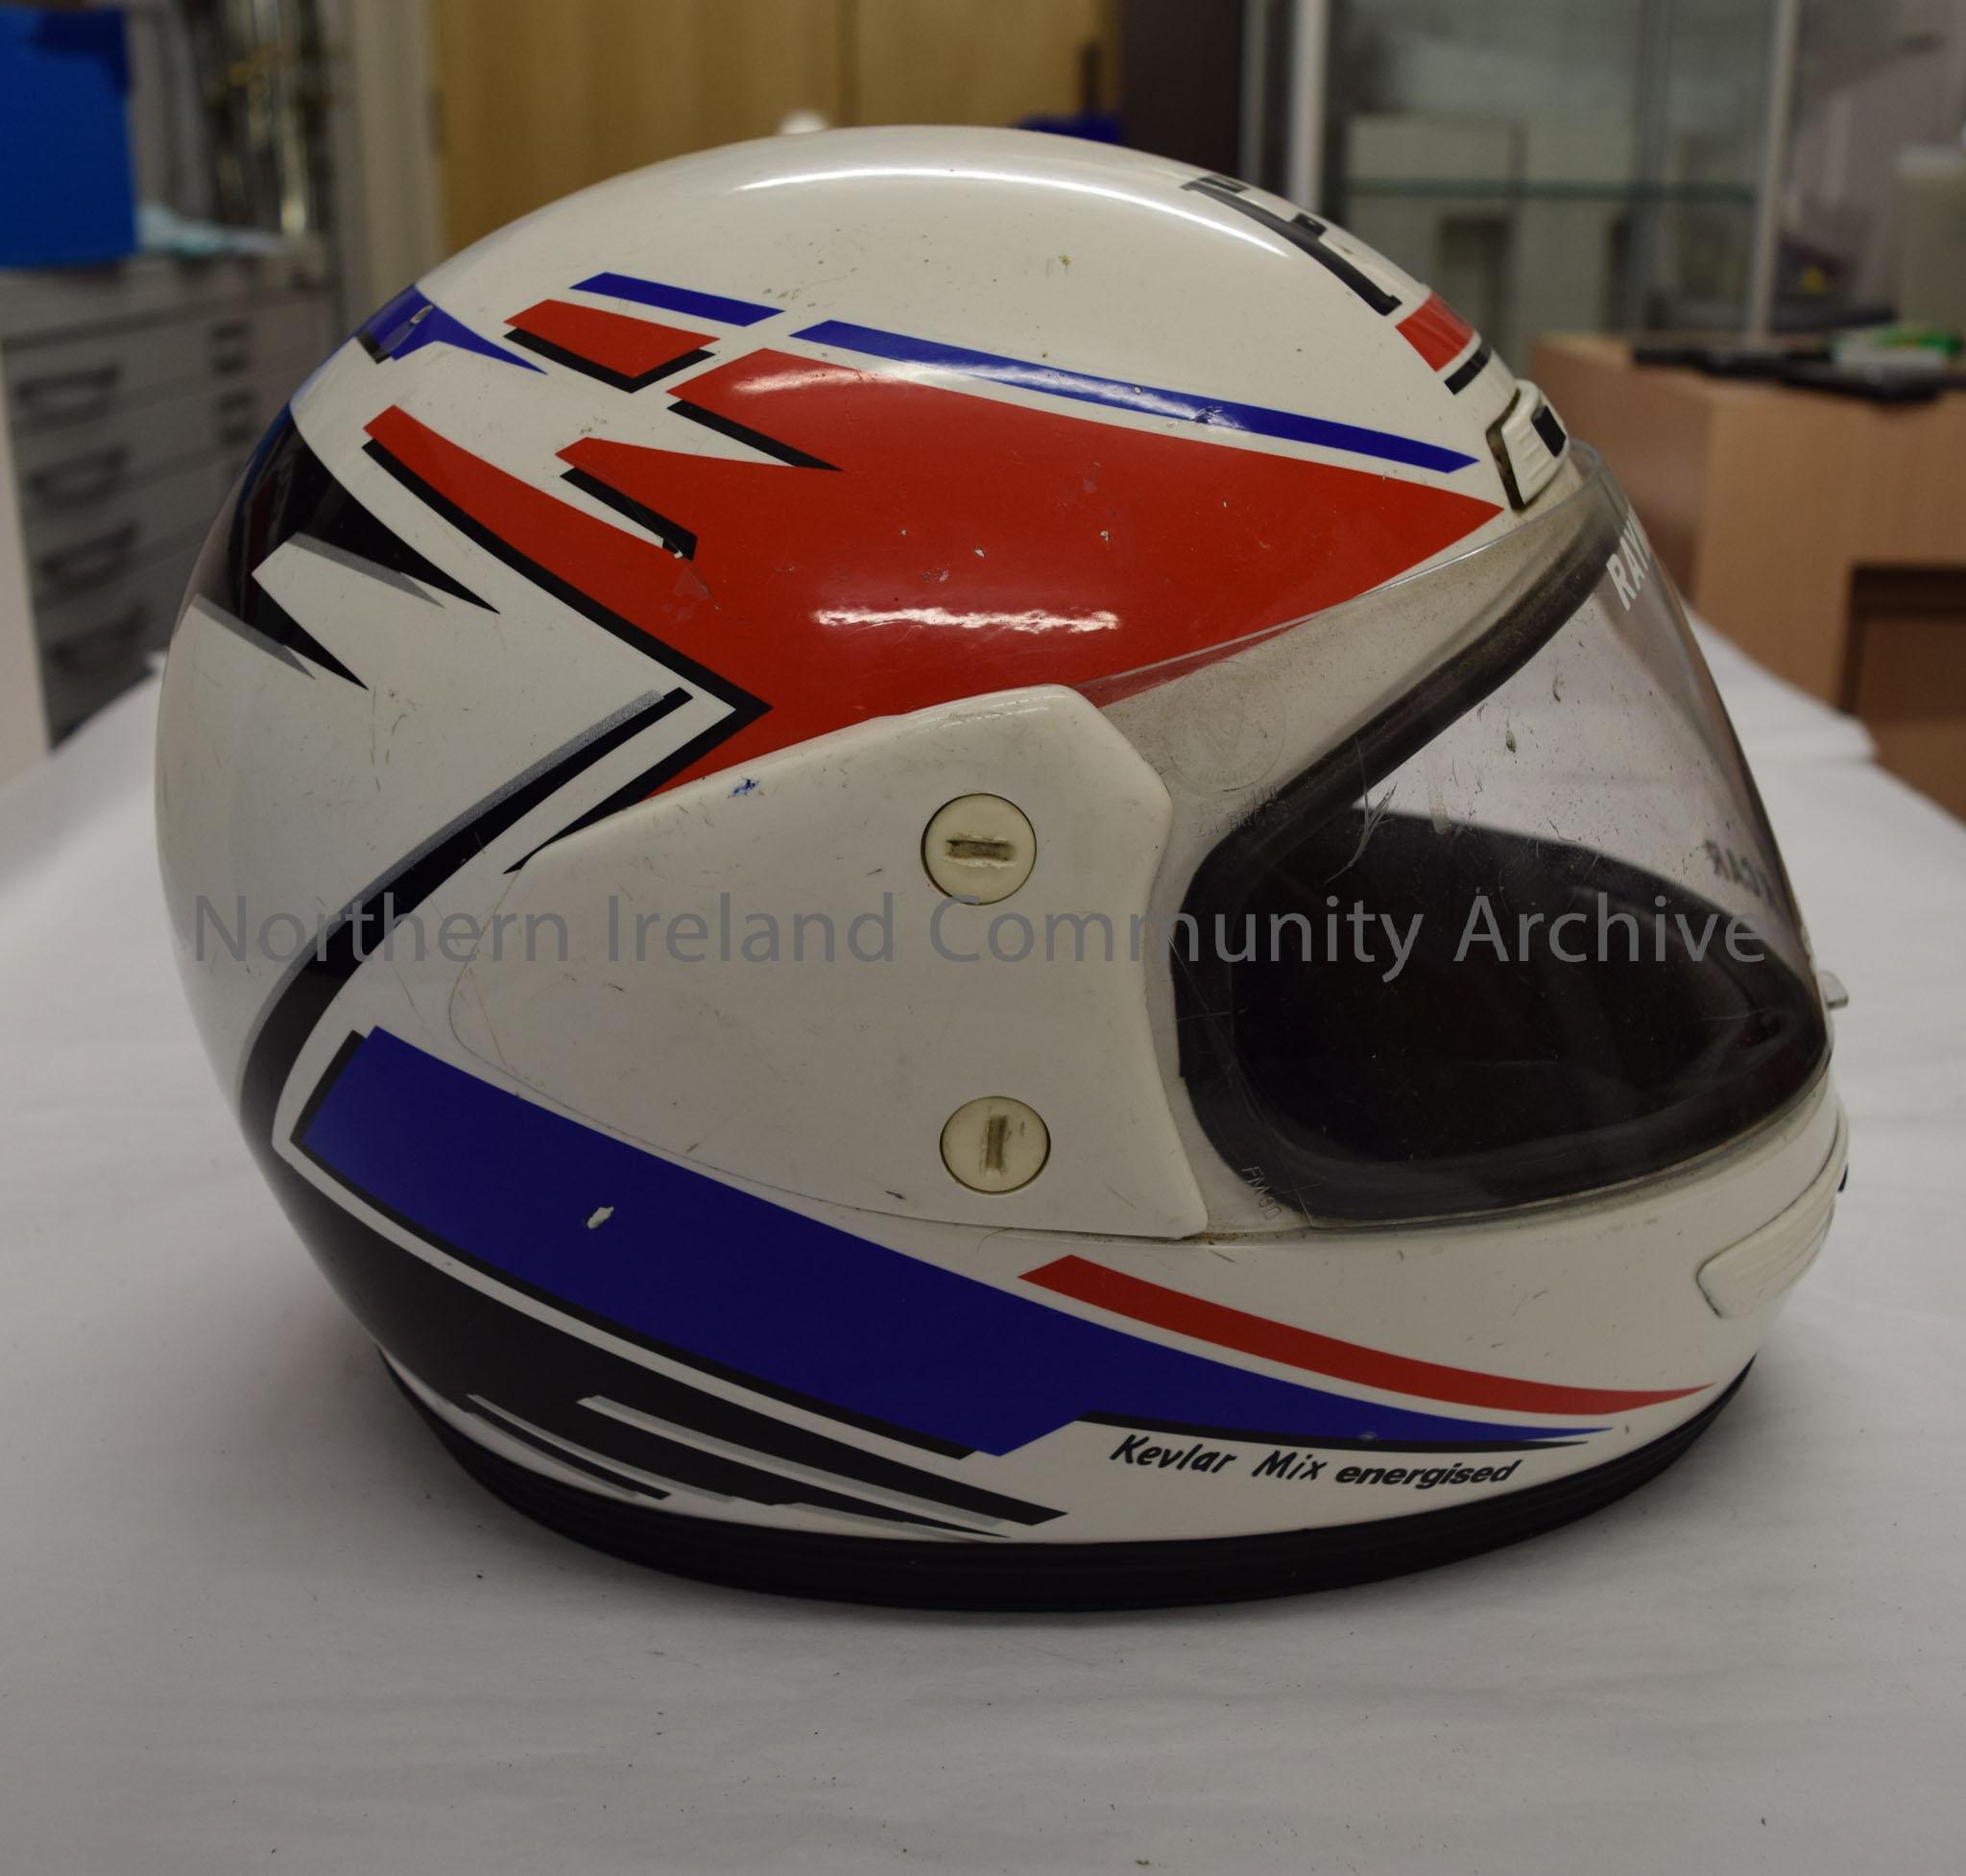 FM by Fimez stock car helmet belonging to Raymond Hodge. White with a blue, red and black pattern on the sides. – 2016.81 (5)